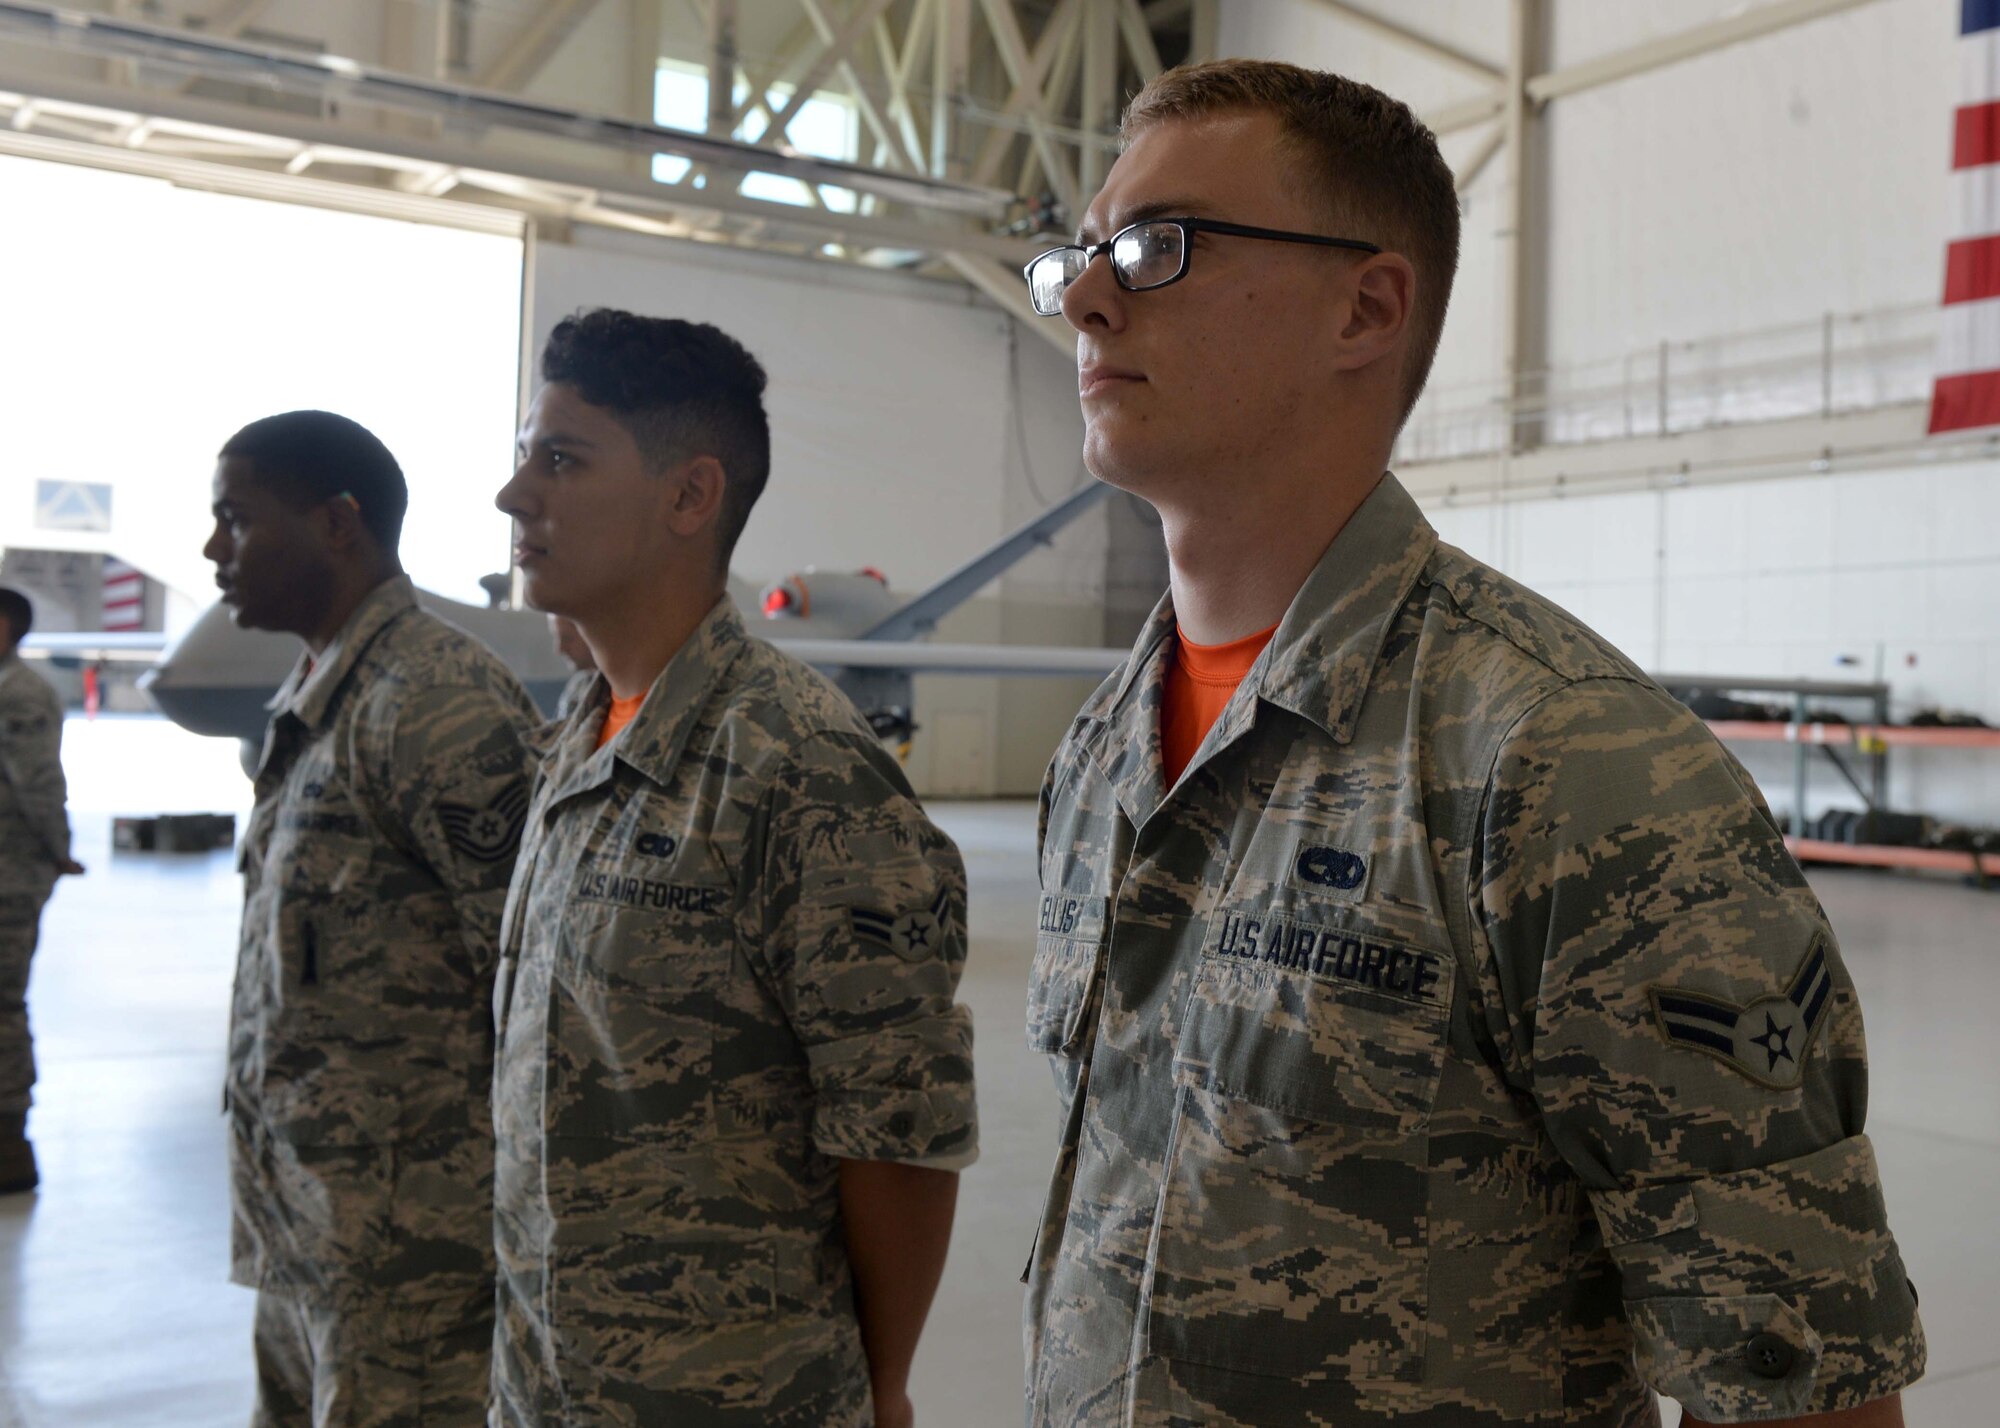 Airmen from the 432nd Aircraft Maintenance Squadron stand at parade rest during the Load Crew of the Quarter competition July 1, 2016, at Creech Air Force Base, Nevada. Load competitions such as this are an integral part of tradition and promote camaraderie throughout the 432nd AMXS. (U.S. Air Force photo by Airman 1st Class Kristan Campbell/Released)